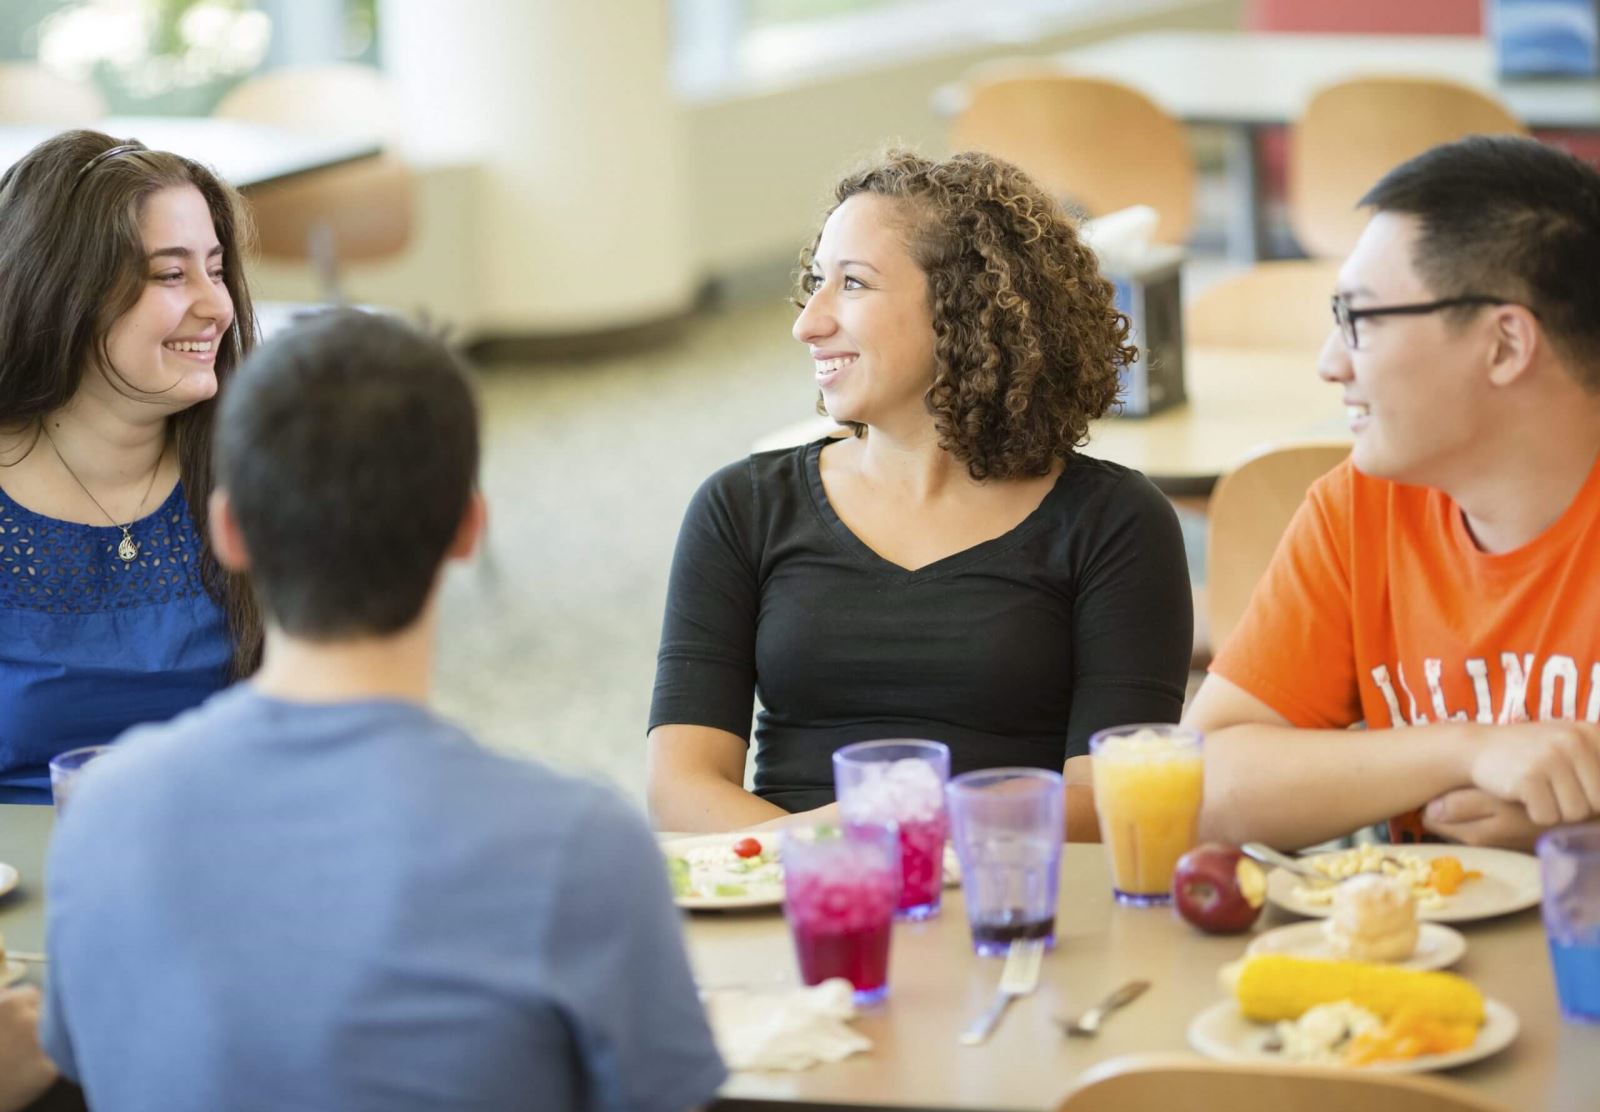 Students chatting while eating at table in dining hall